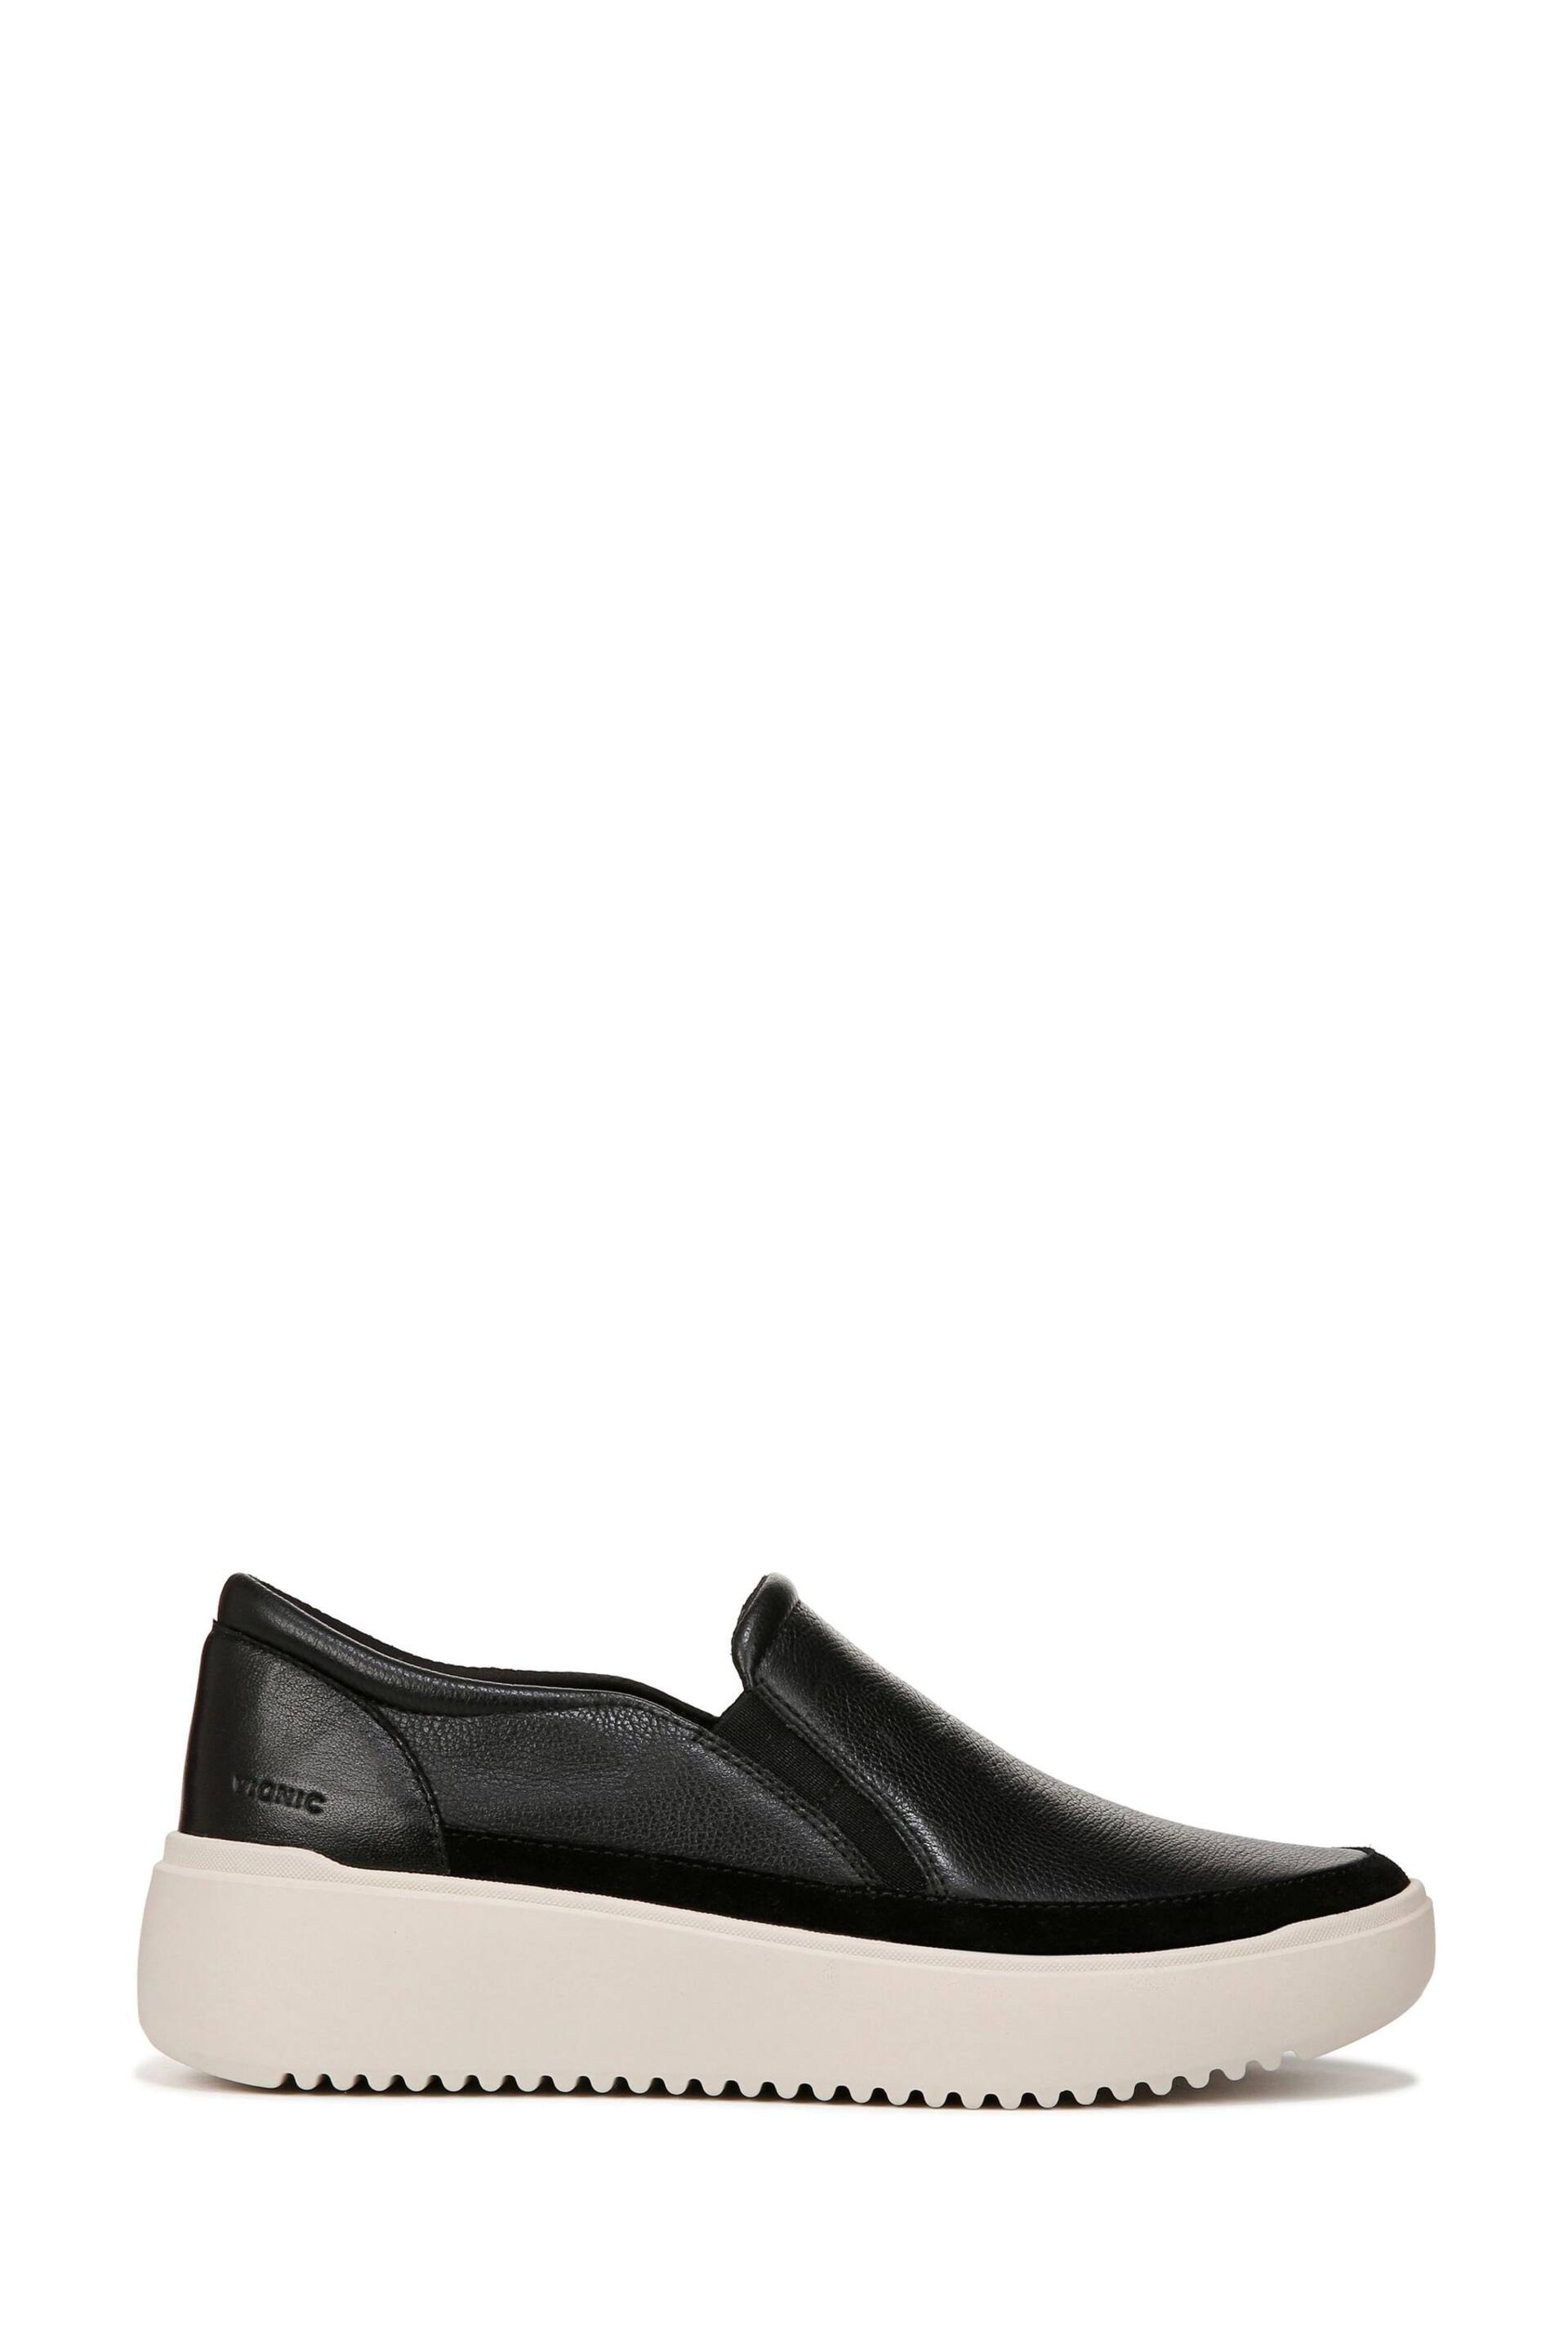 Vionic Kearny Wide Fit Slip-On Trainers - Image 1 of 7